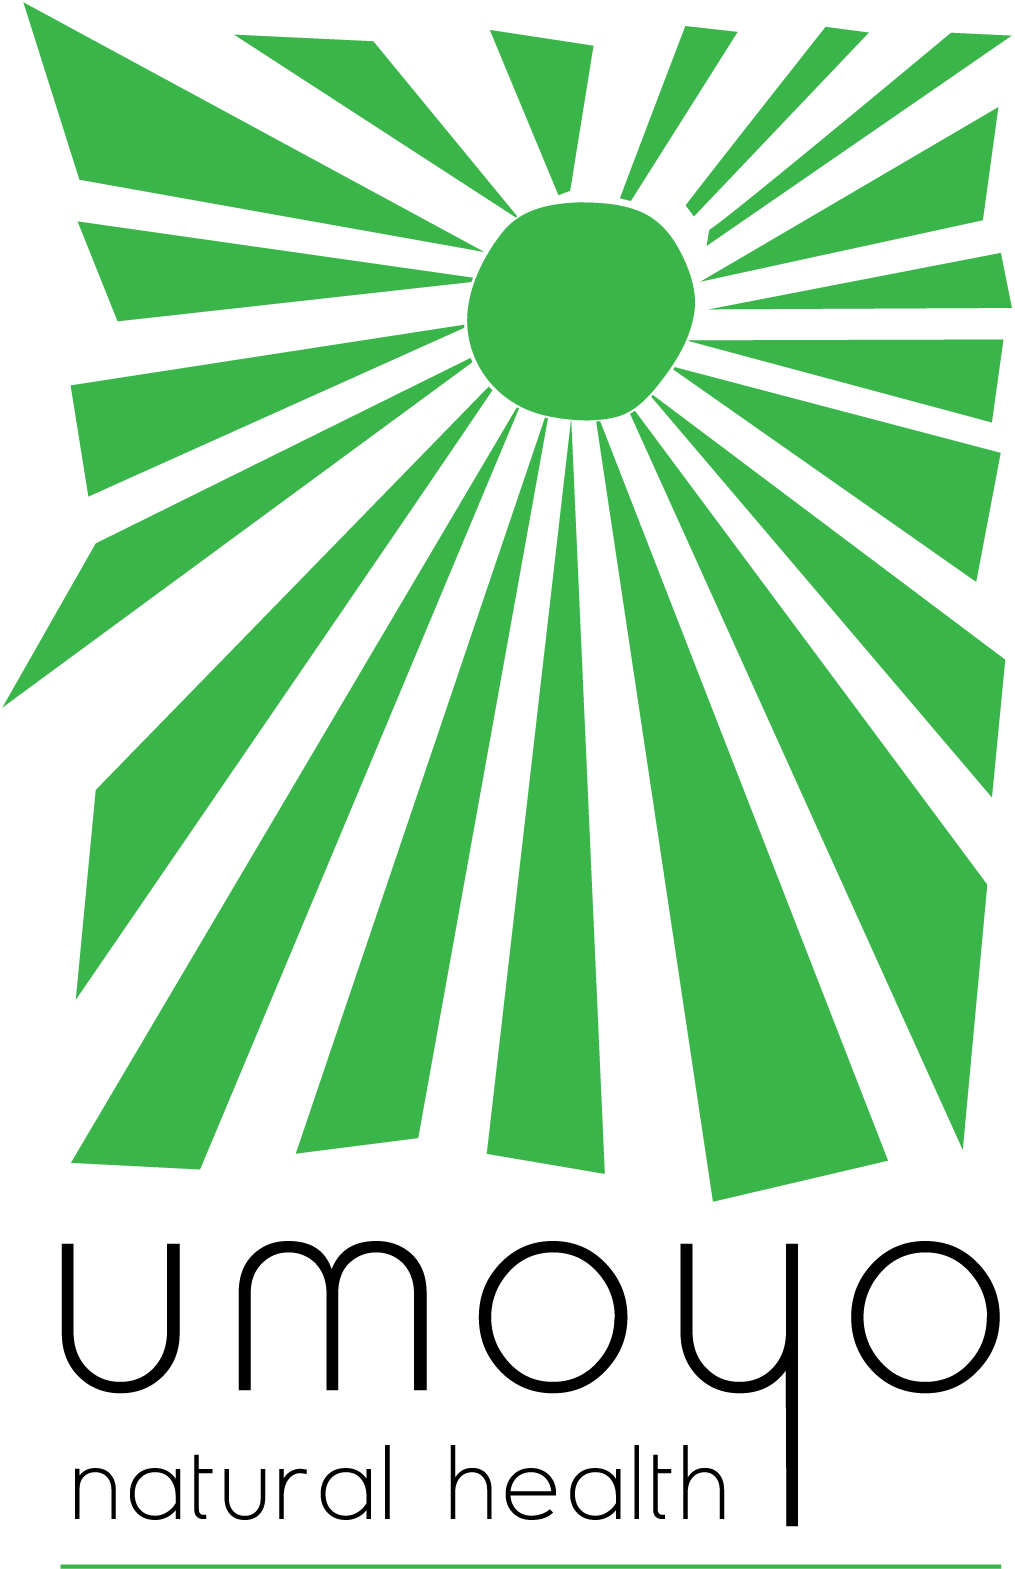 A green and white logo for umoyo natural health with a sun in the middle.